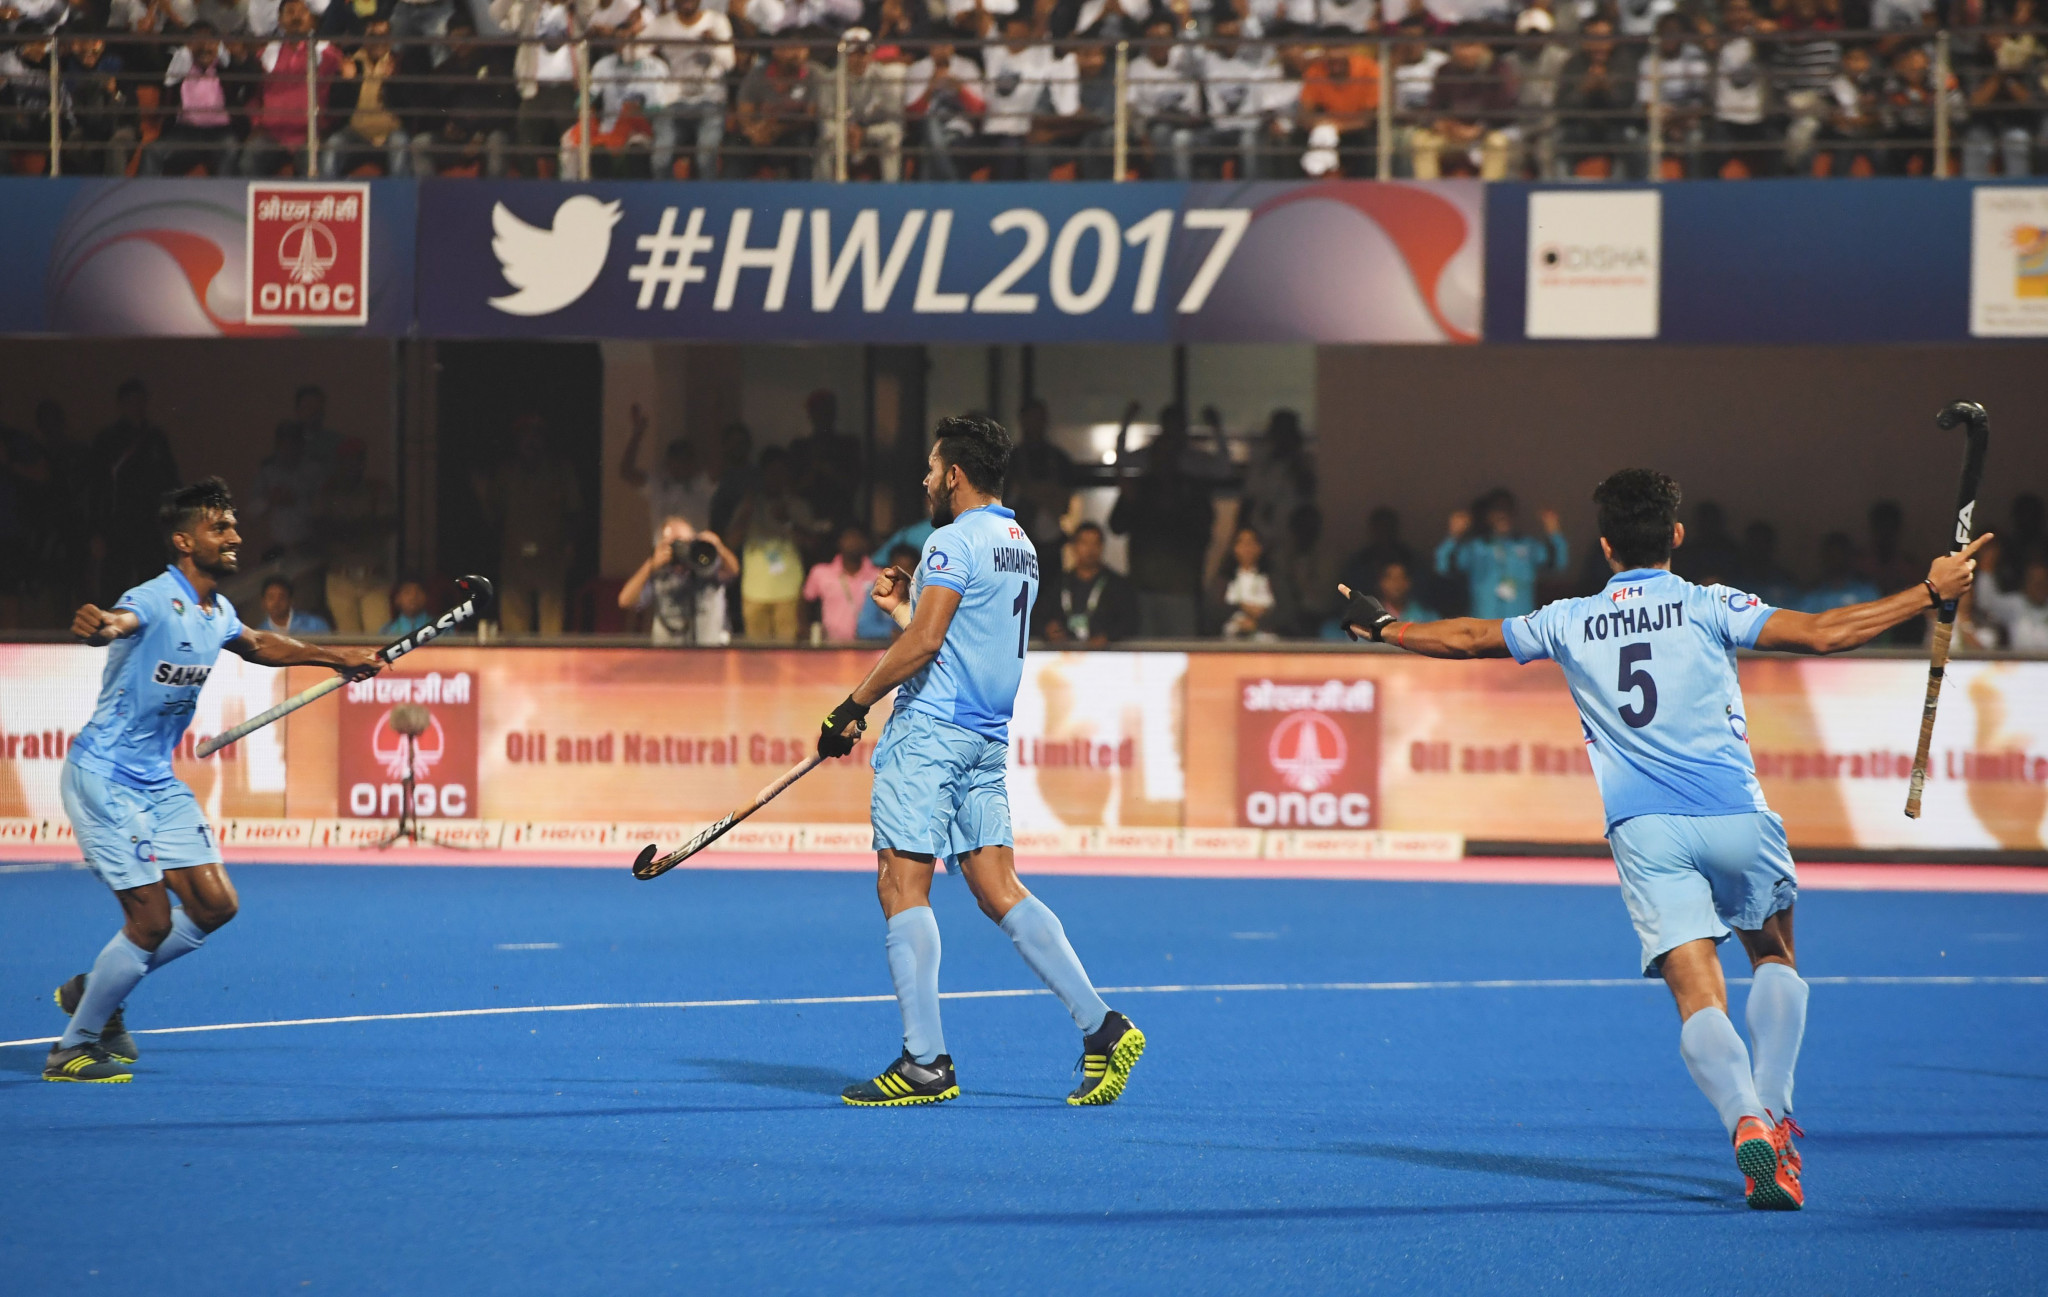 Harmanpreet Singh, centre, scored the winning goal as India beat Germany 2-1 in the bronze medal match of the Hockey World League tournament in Bhubaneswar ©Getty Images